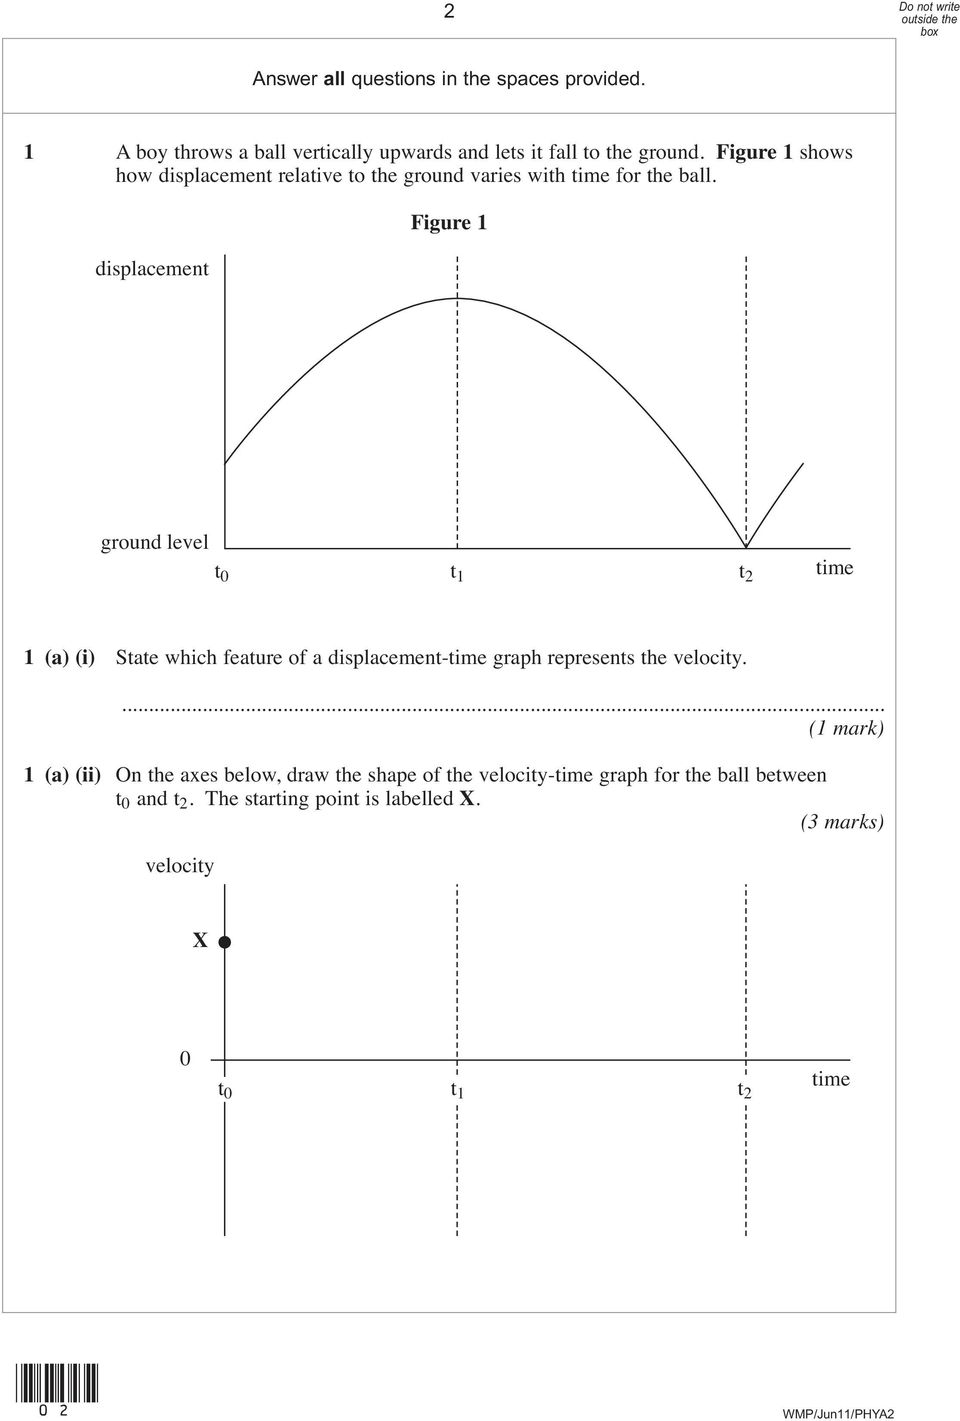 displacement Figure 1 ground level t 0 t 1 t 2 time 1 (a) (i) State which feature of a displacement-time graph represents the